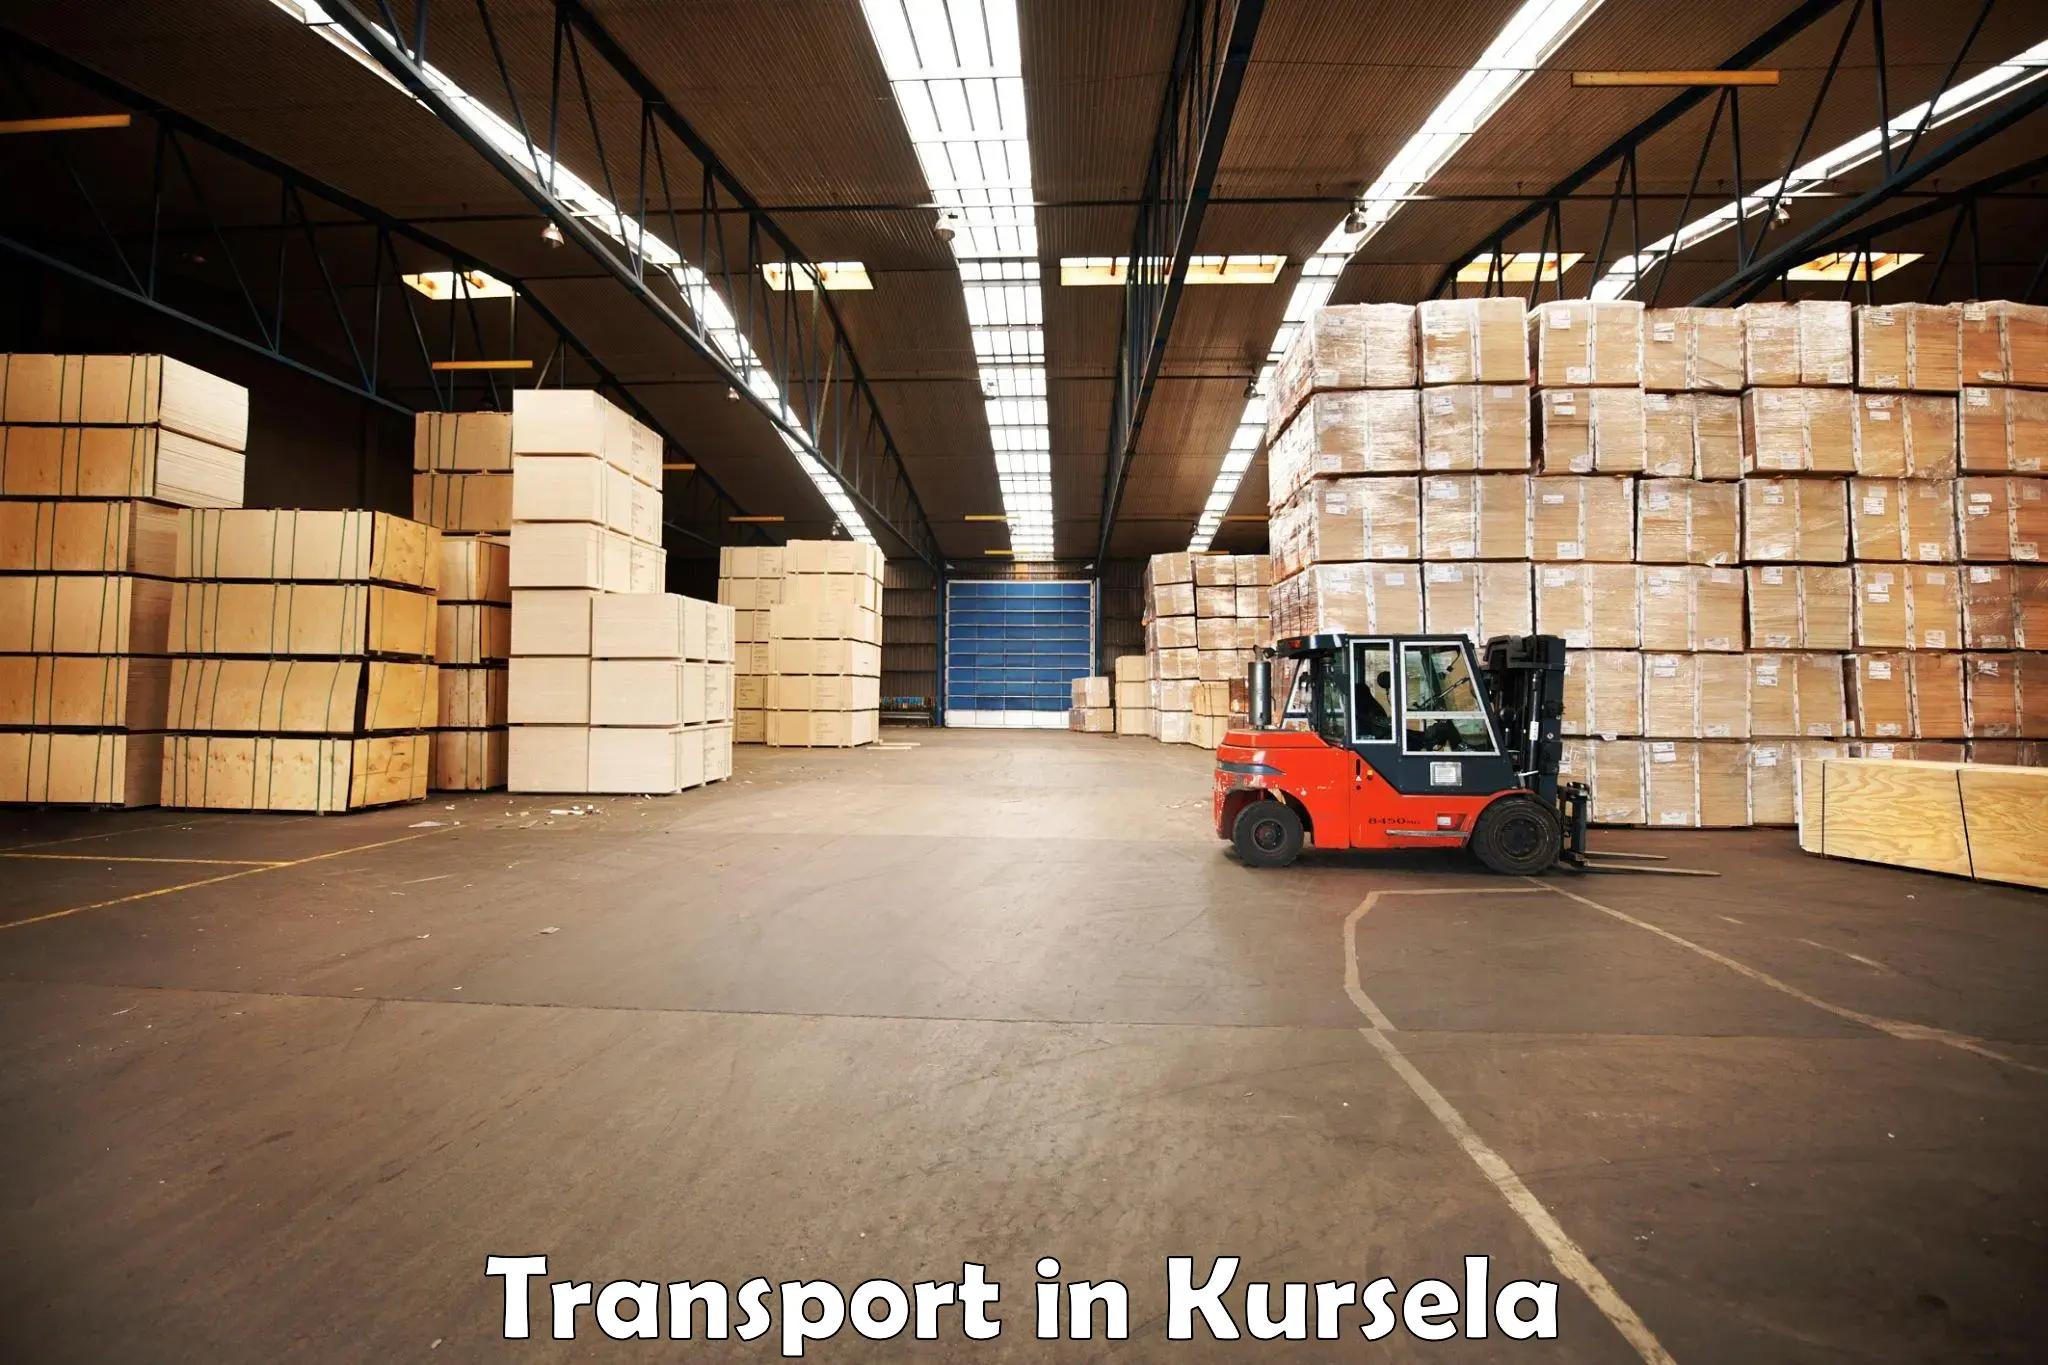 Vehicle transport services in Kursela